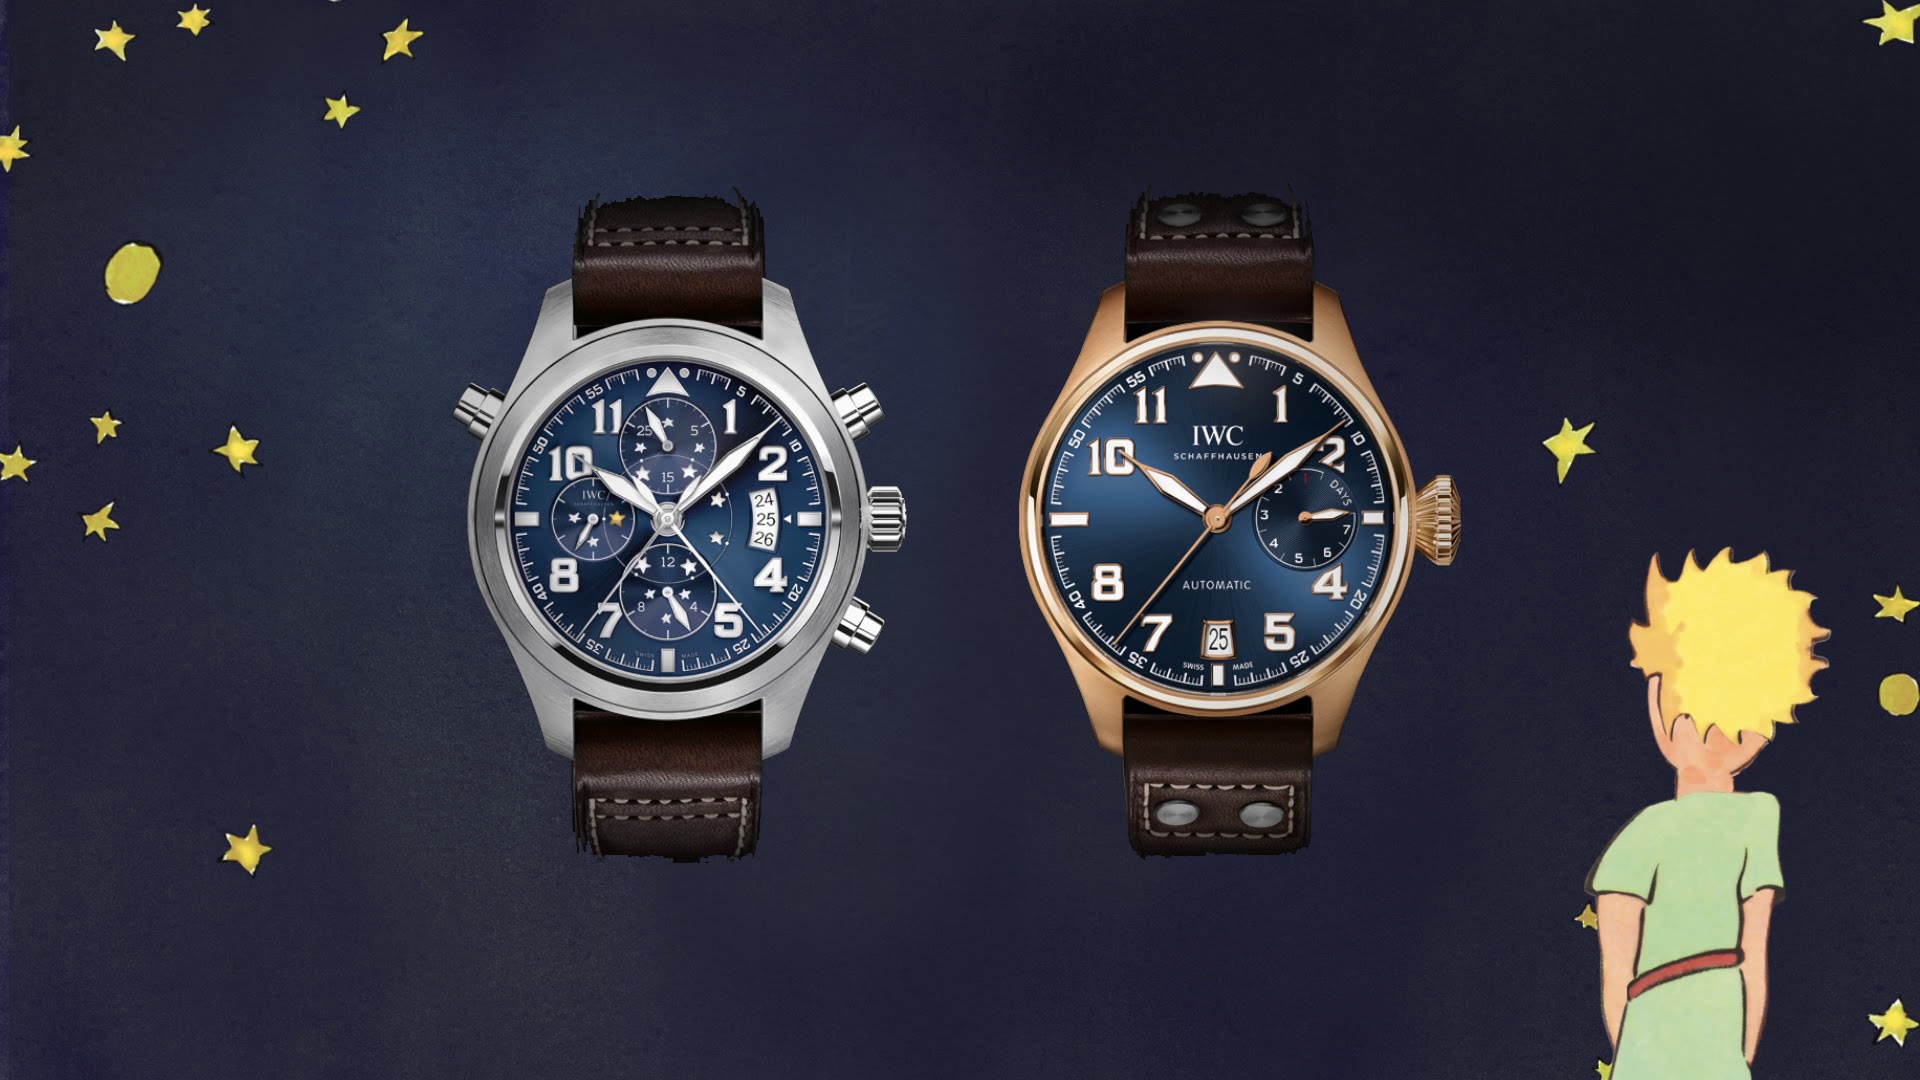 The IWC Pilot's Watch Double Chronograph Edition --- "Le Petit Prince" Replica Watch For Sale